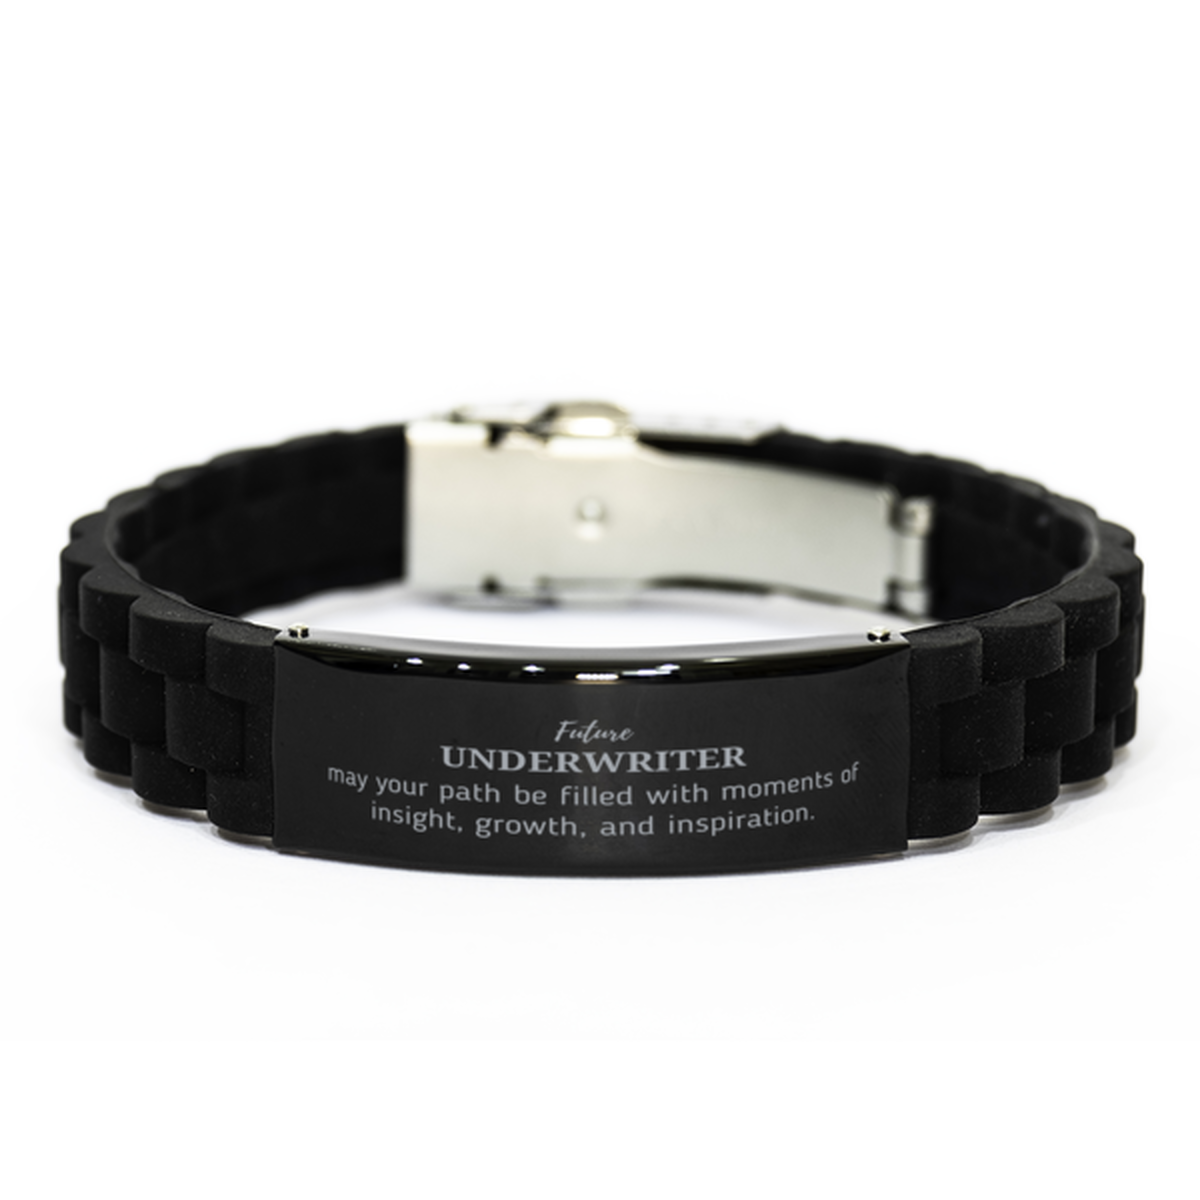 Future Underwriter Gifts, May your path be filled with moments of insight, Graduation Gifts for New Underwriter, Christmas Unique Black Glidelock Clasp Bracelet For Men, Women, Friends